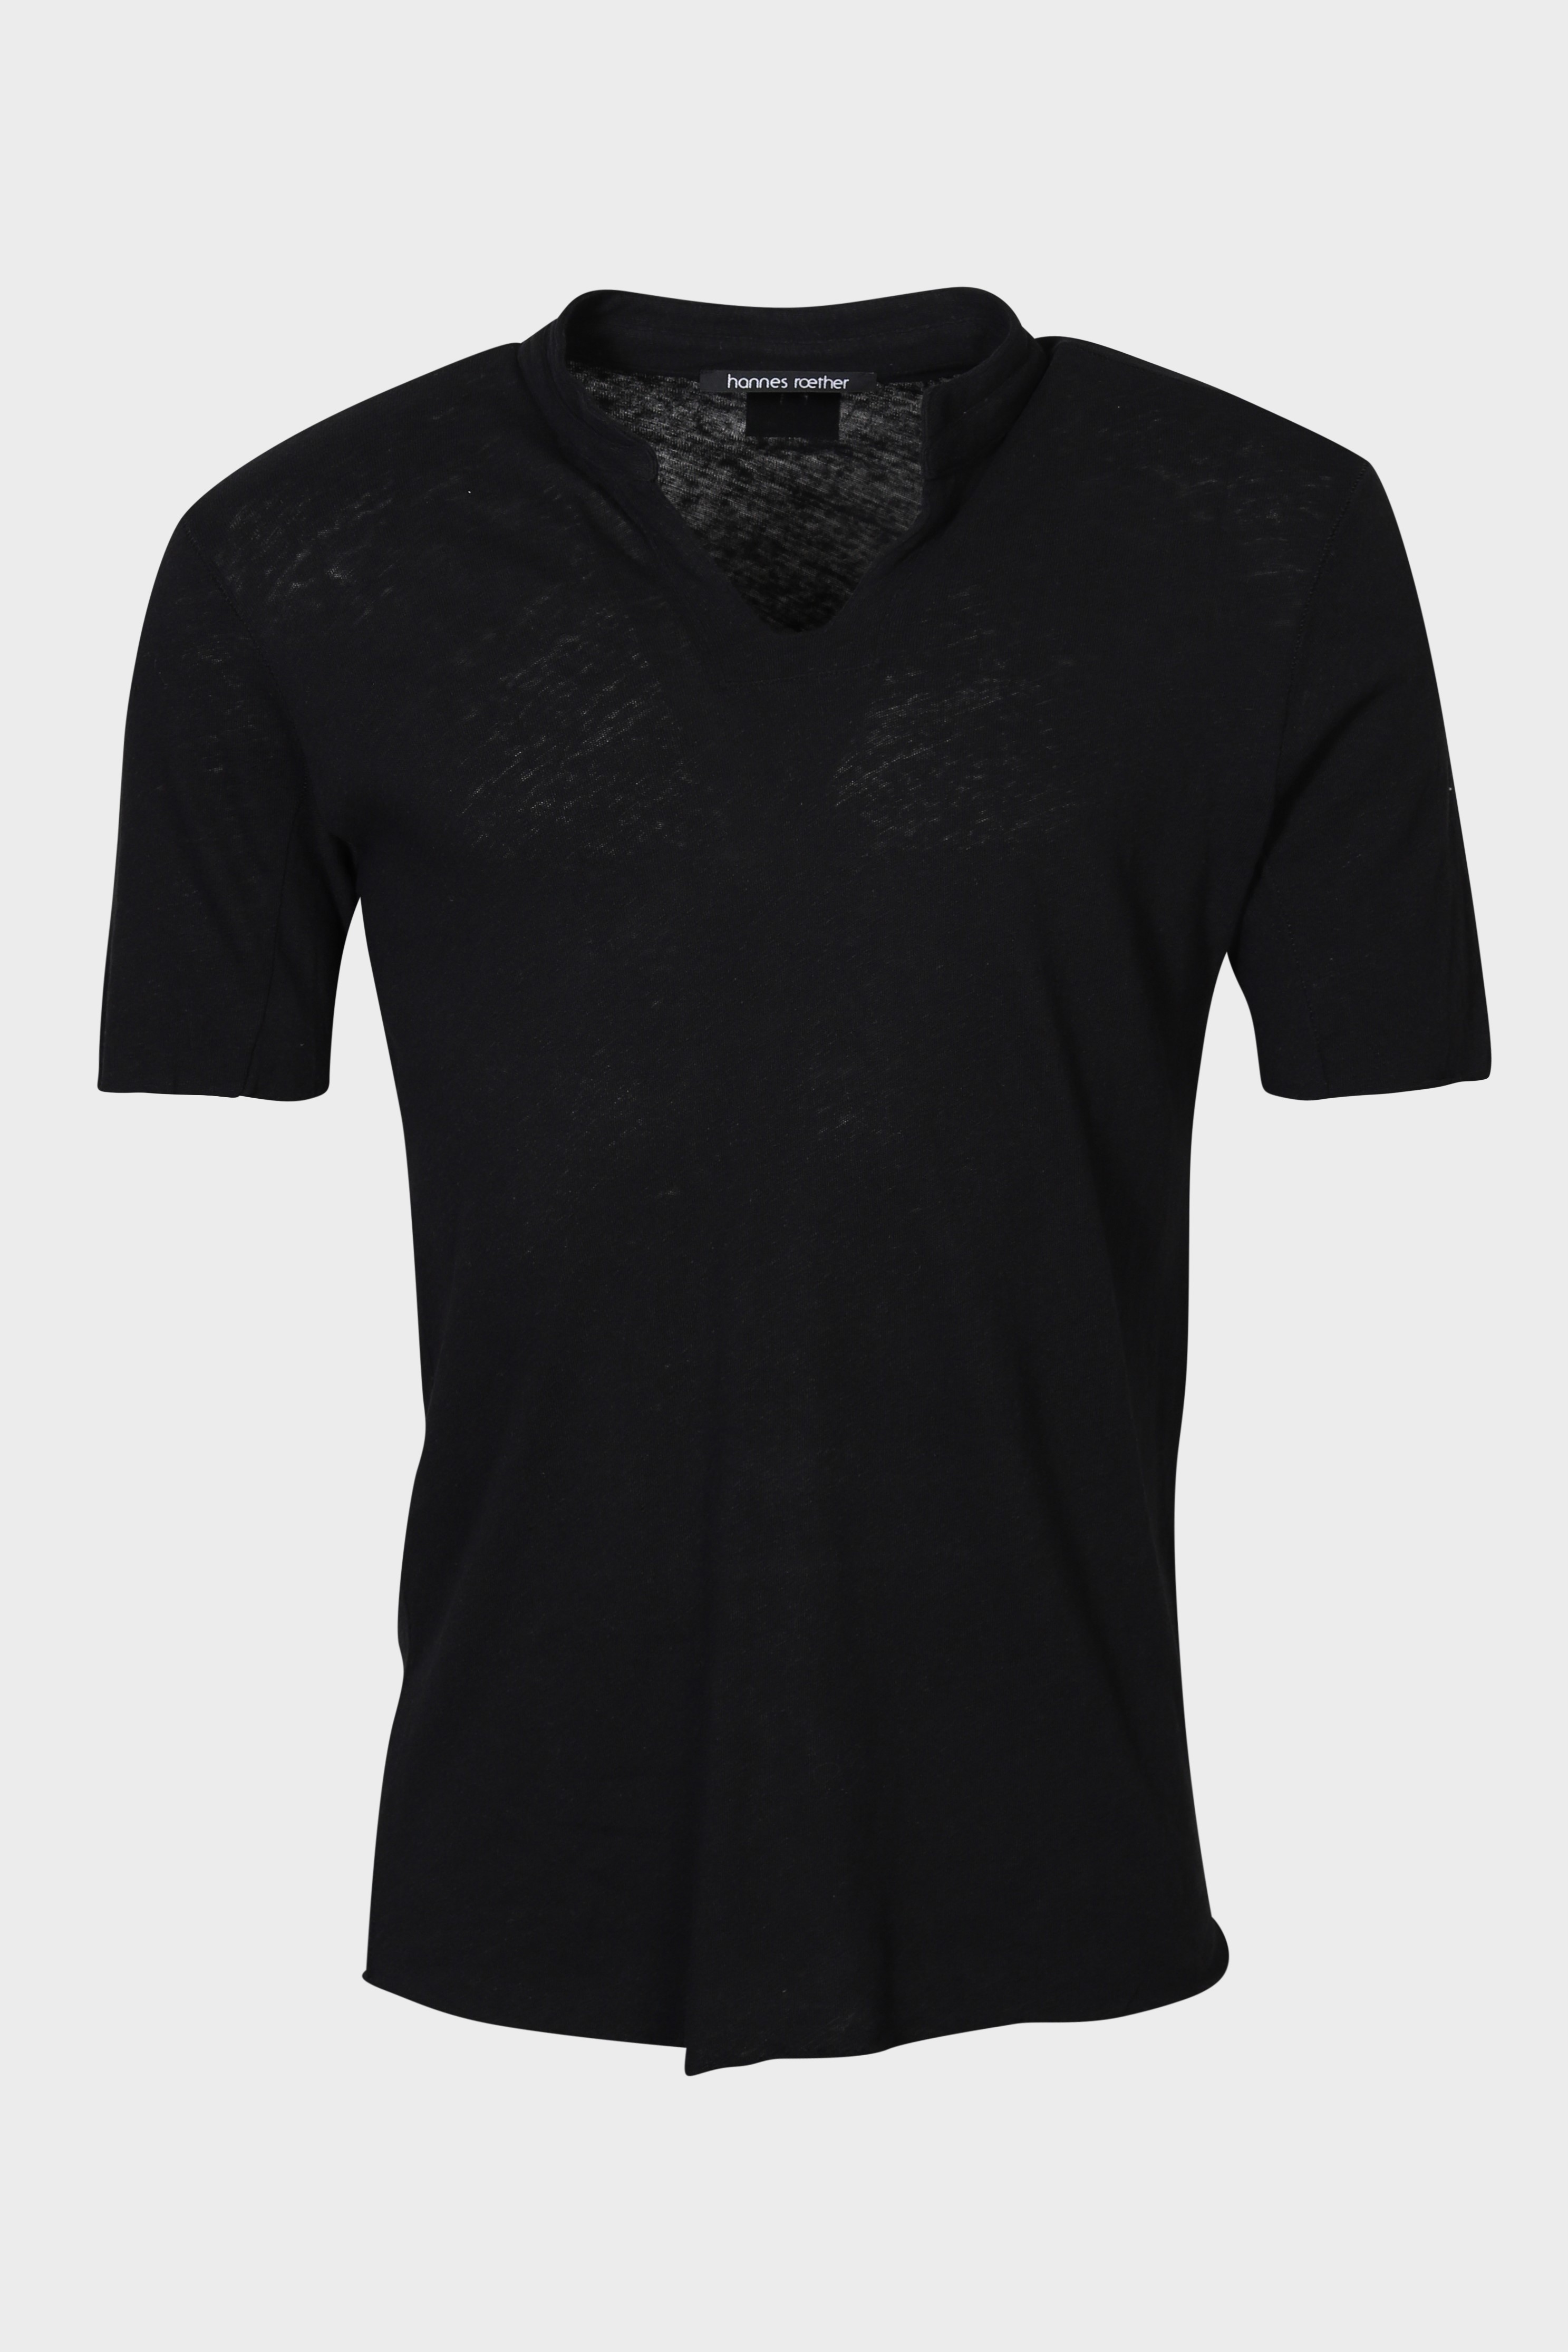 HANNES ROETHER Cotton Linen T-Shirt in Black 3XL